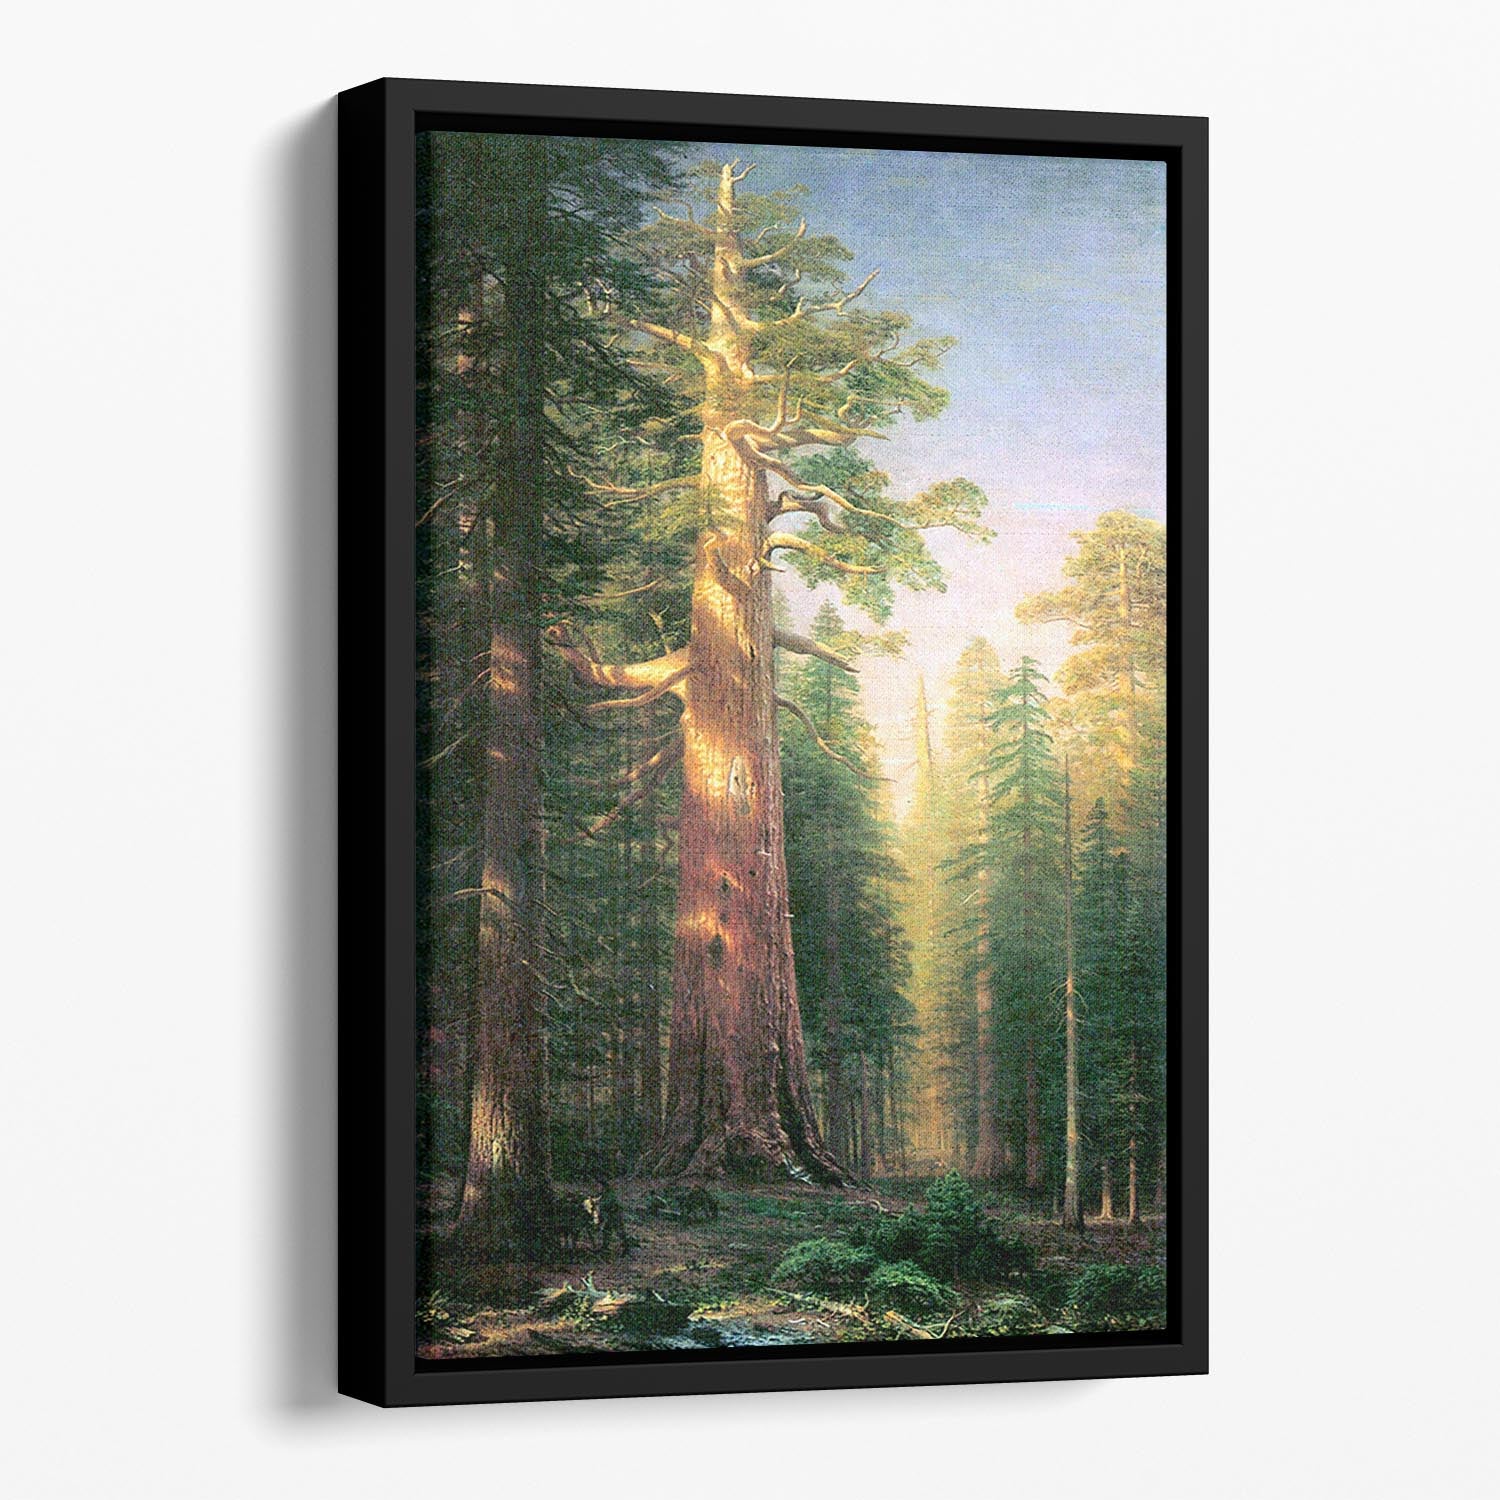 The big trees Mariposa Grove California by Bierstadt Floating Framed Canvas - Canvas Art Rocks - 1